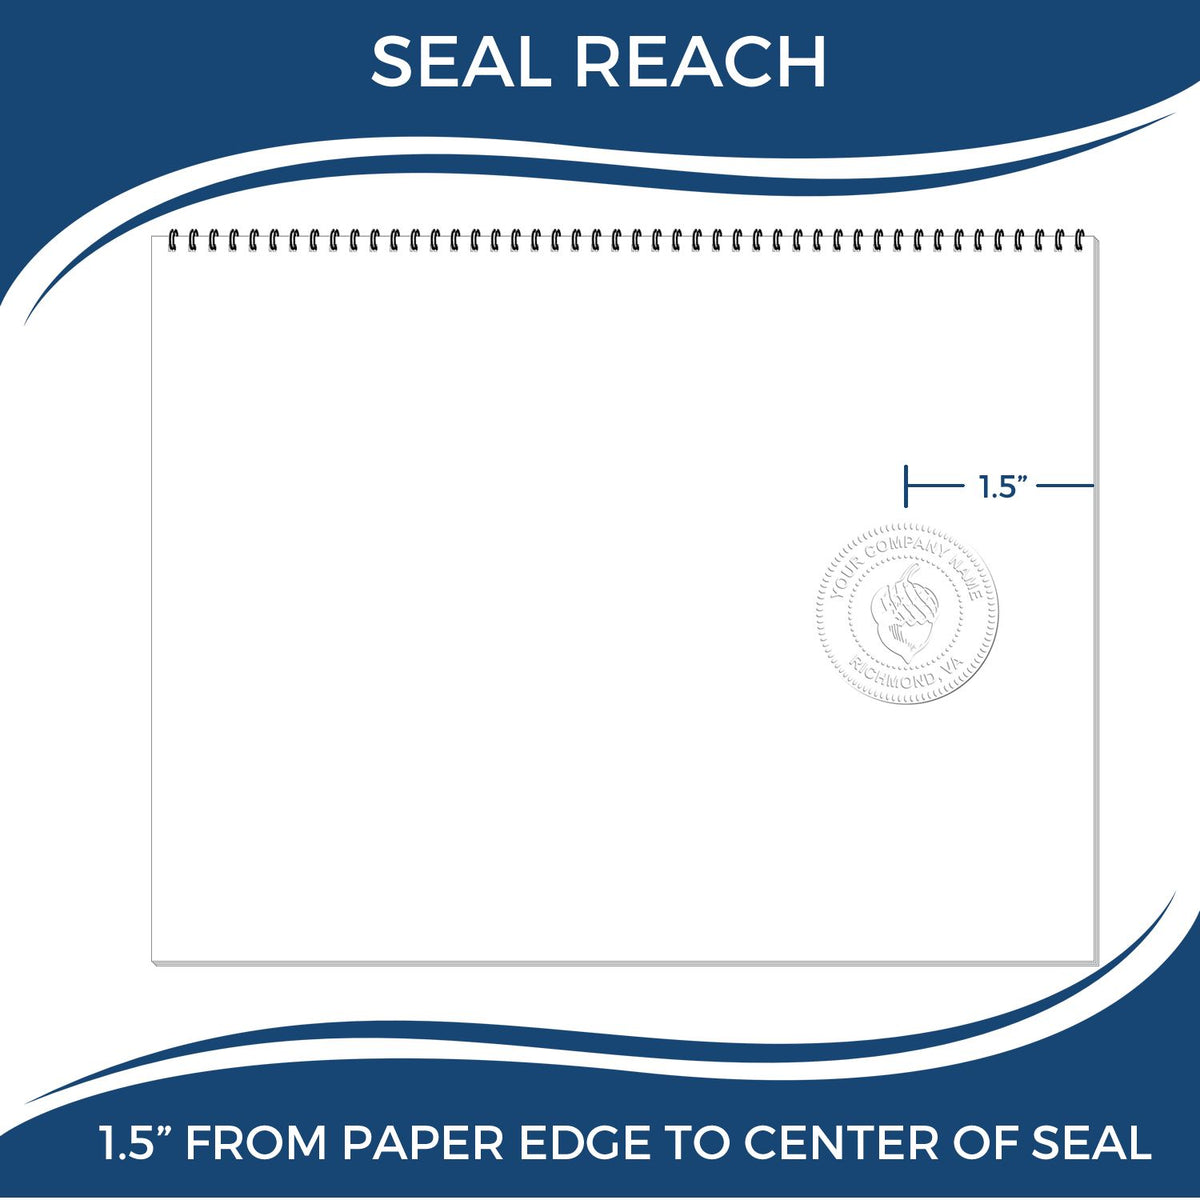 An infographic showing the seal reach which is represented by a ruler and a miniature seal image of the Soft Pocket Louisiana Landscape Architect Embosser